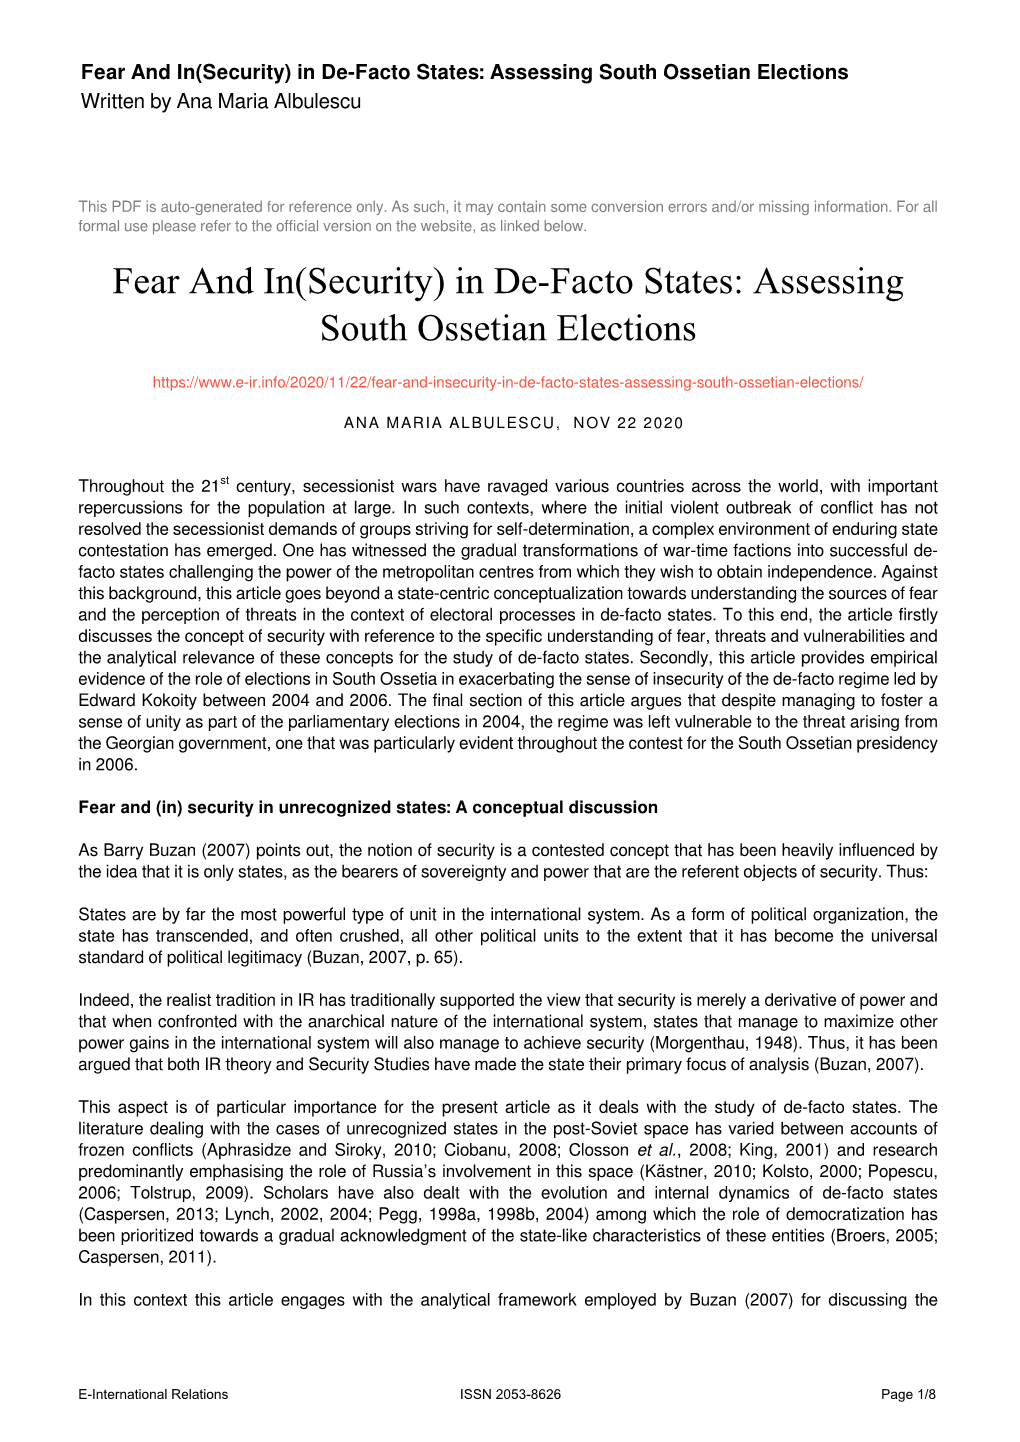 Fear and In(Security) in De-Facto States: Assessing South Ossetian Elections Written by Ana Maria Albulescu